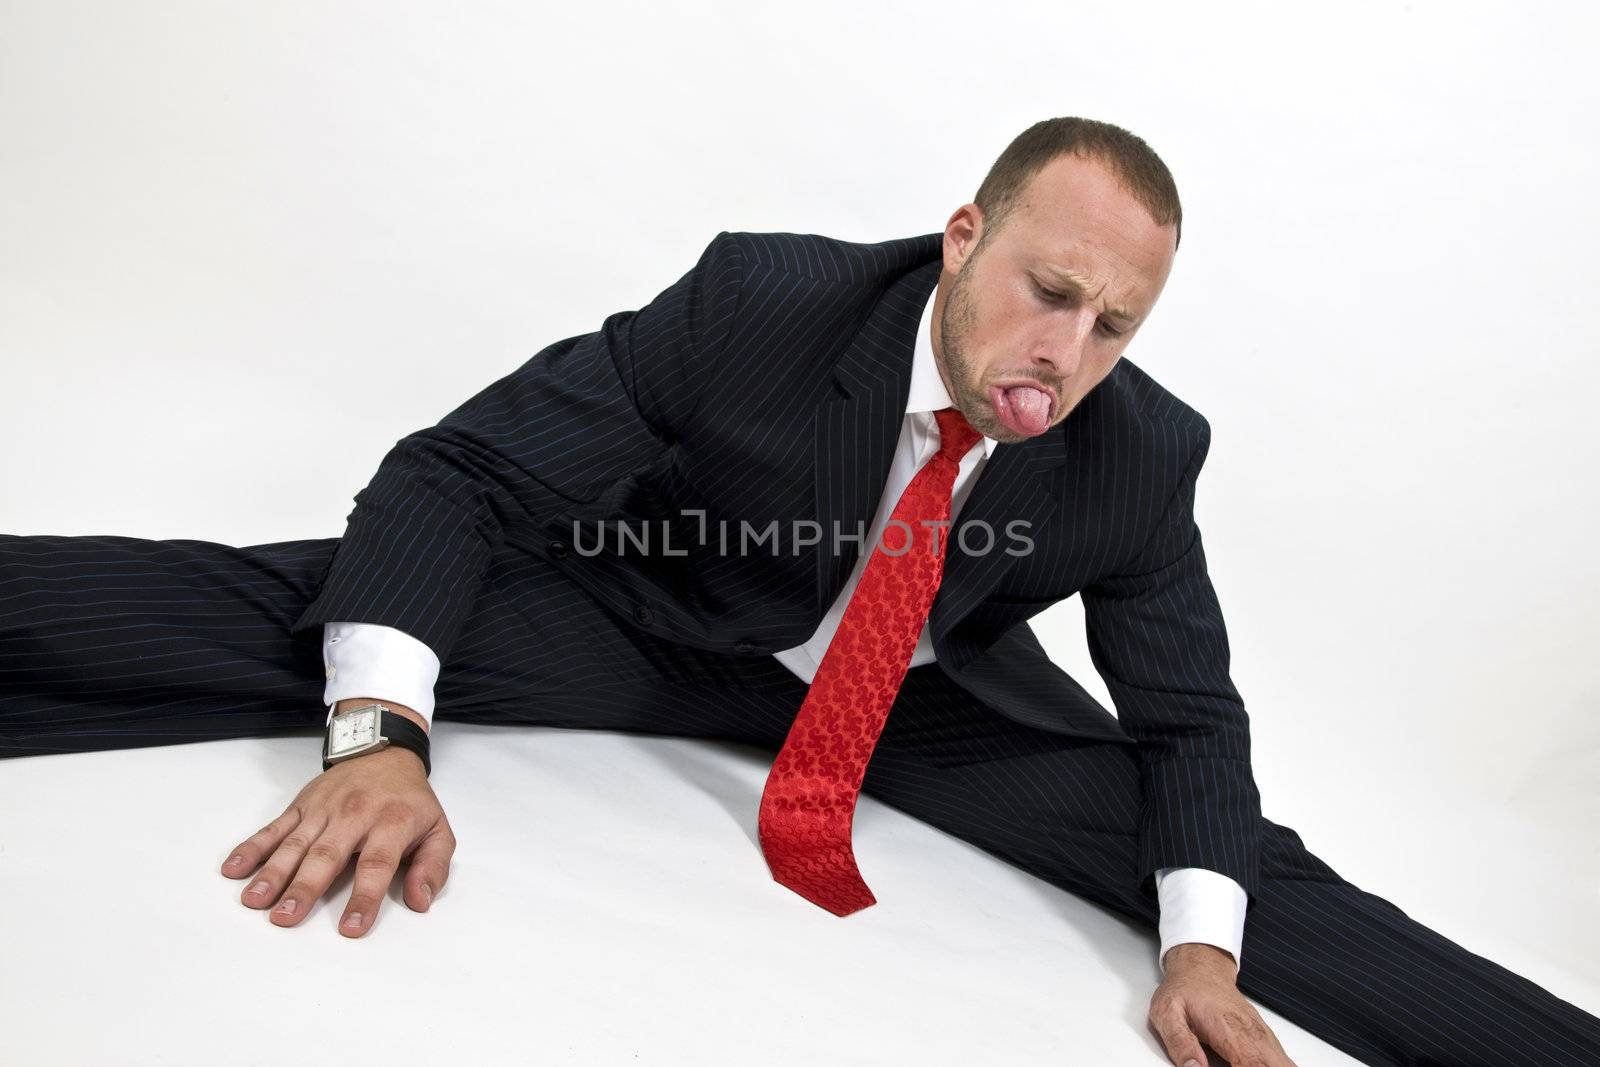 funny man on isolated background

